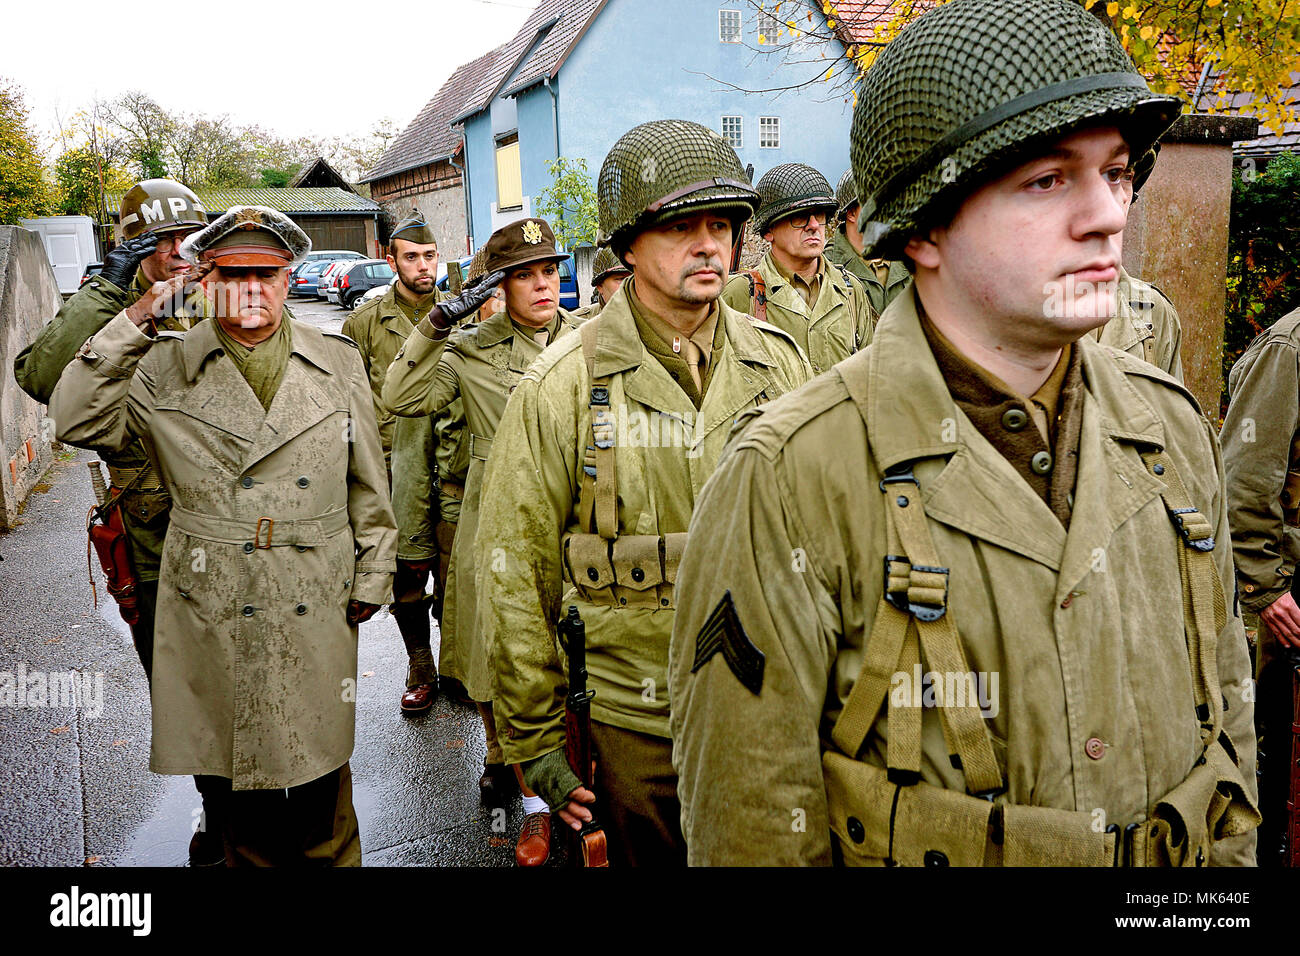 In Scherwiller, France, members of the U.S Army Group of Alsace  re-enactment association donned WWII era army uniforms on the morning of  Saturday, Nov. 11, 2017 as part of the town memorial